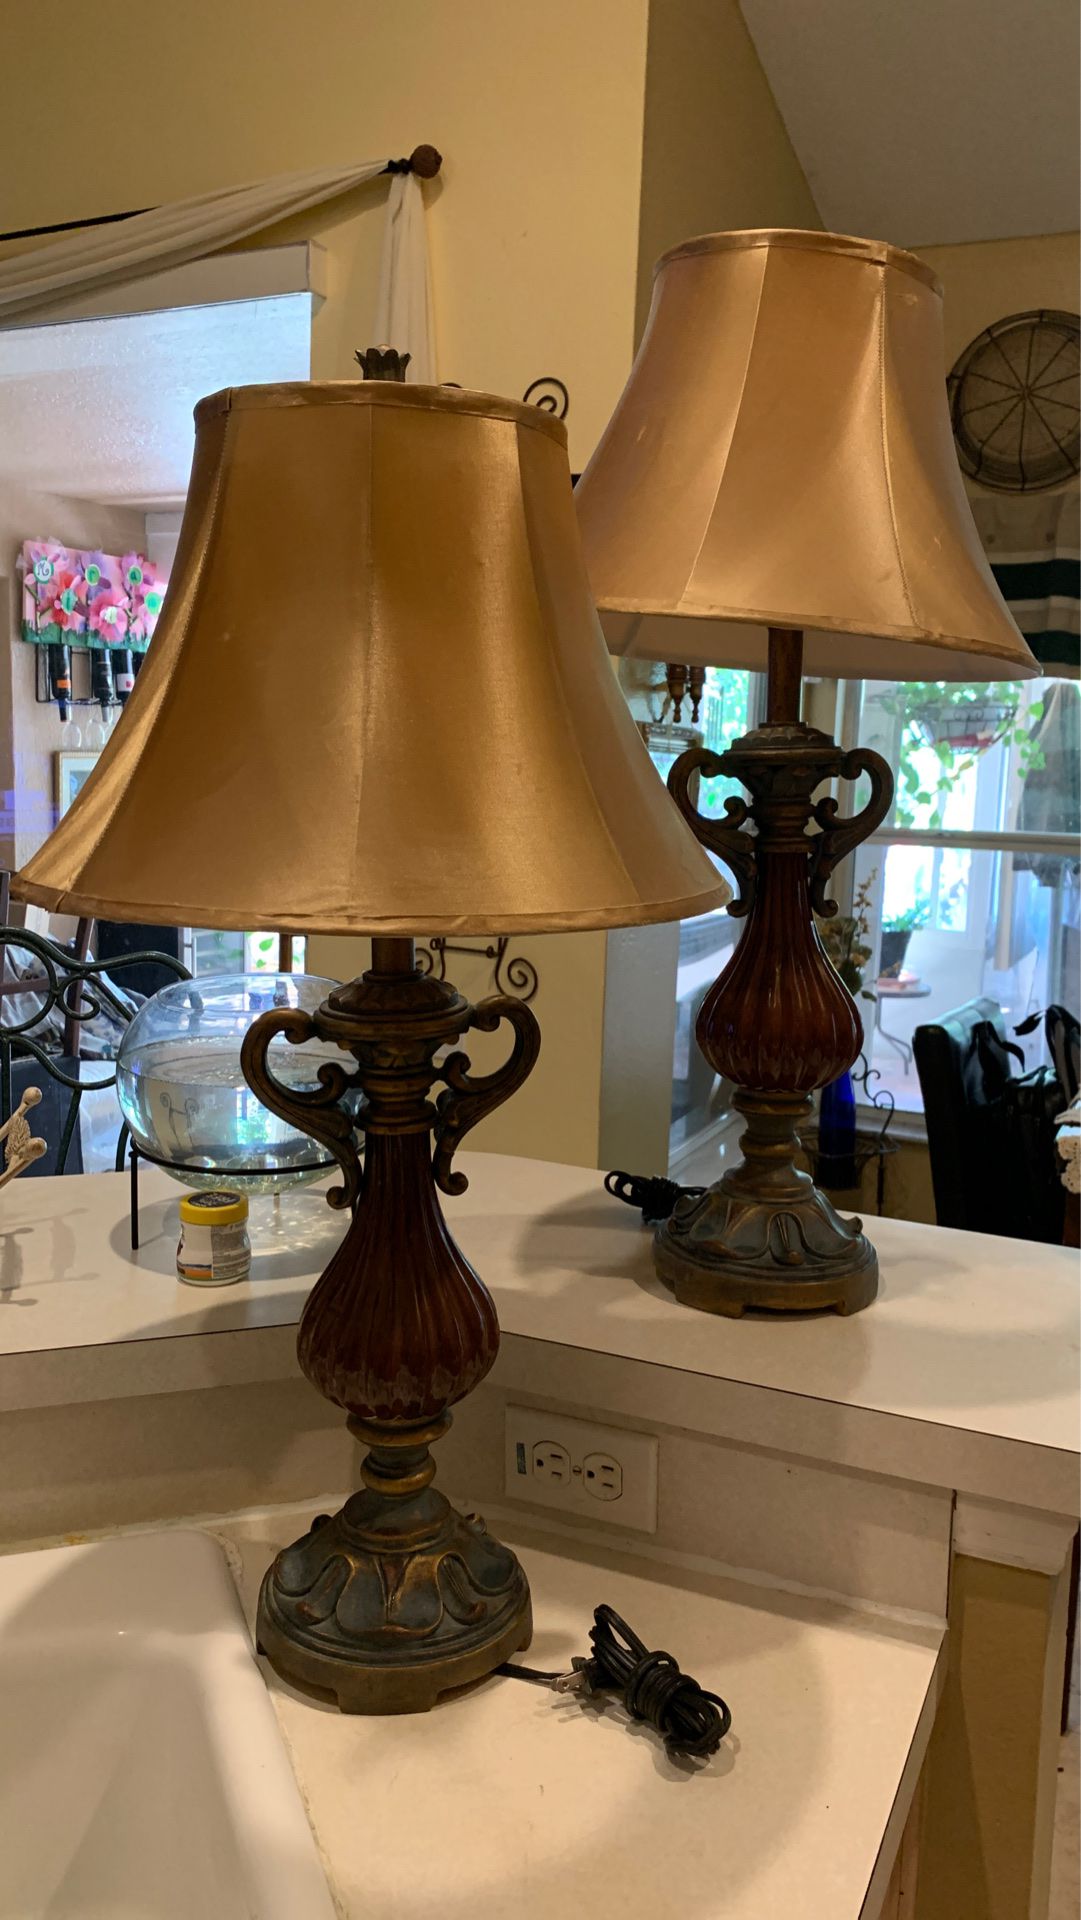 1950’s vintage lamps. Working like new. Very unique and pretty both for $40